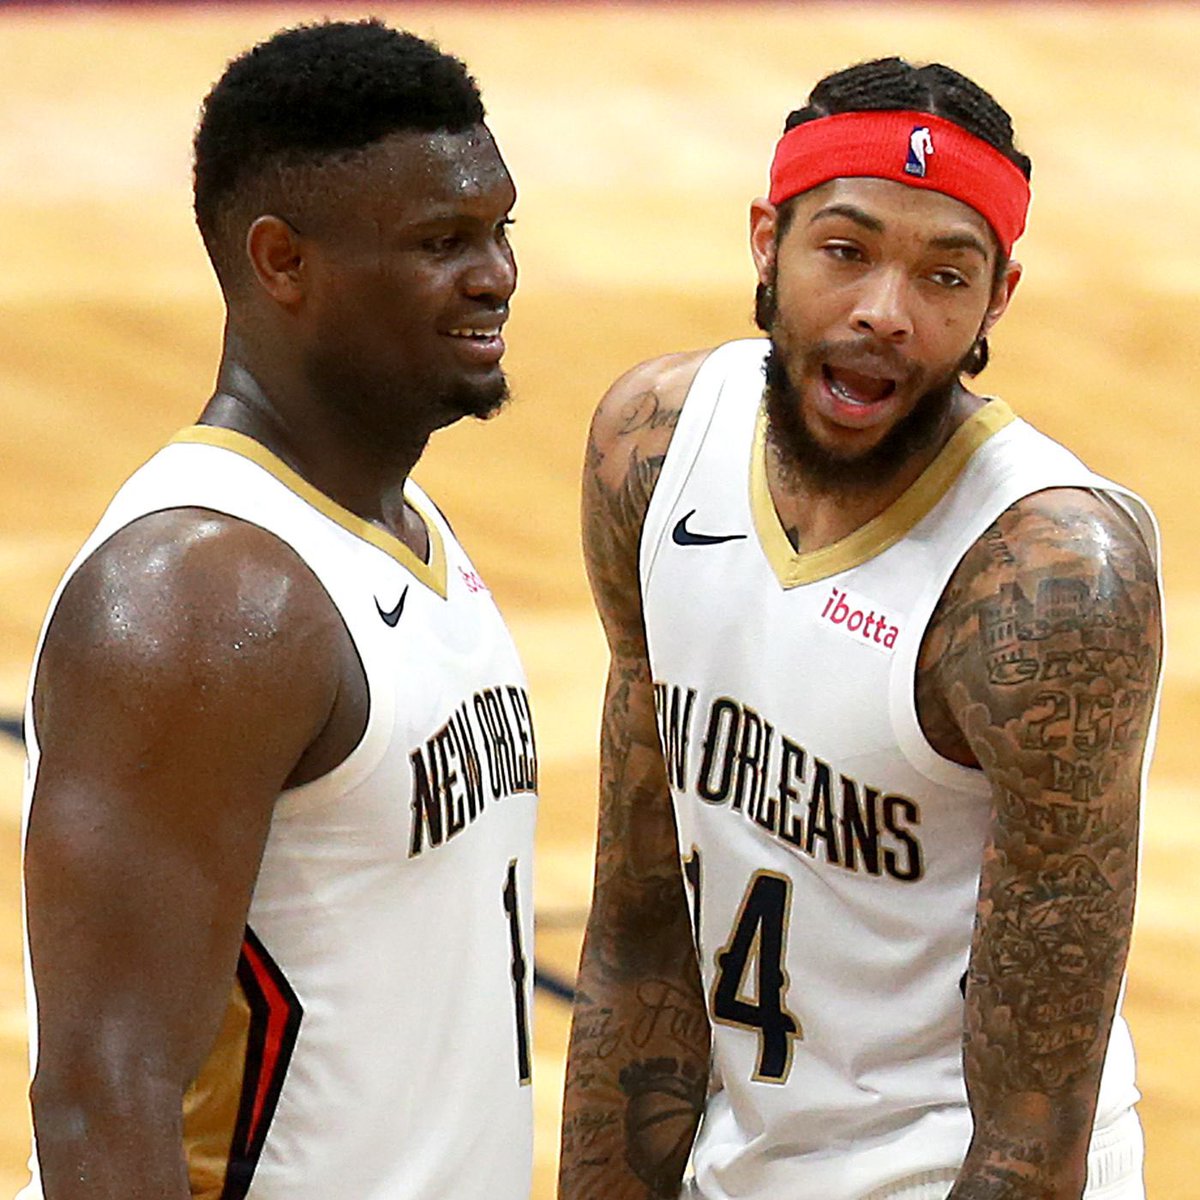 RT @ProPelsTalk: It healthy are Brandon Ingram and Zion Williamson a Top 5 duo in the NBA? @Lito_TheGawd https://t.co/JyJ2AAKS8e